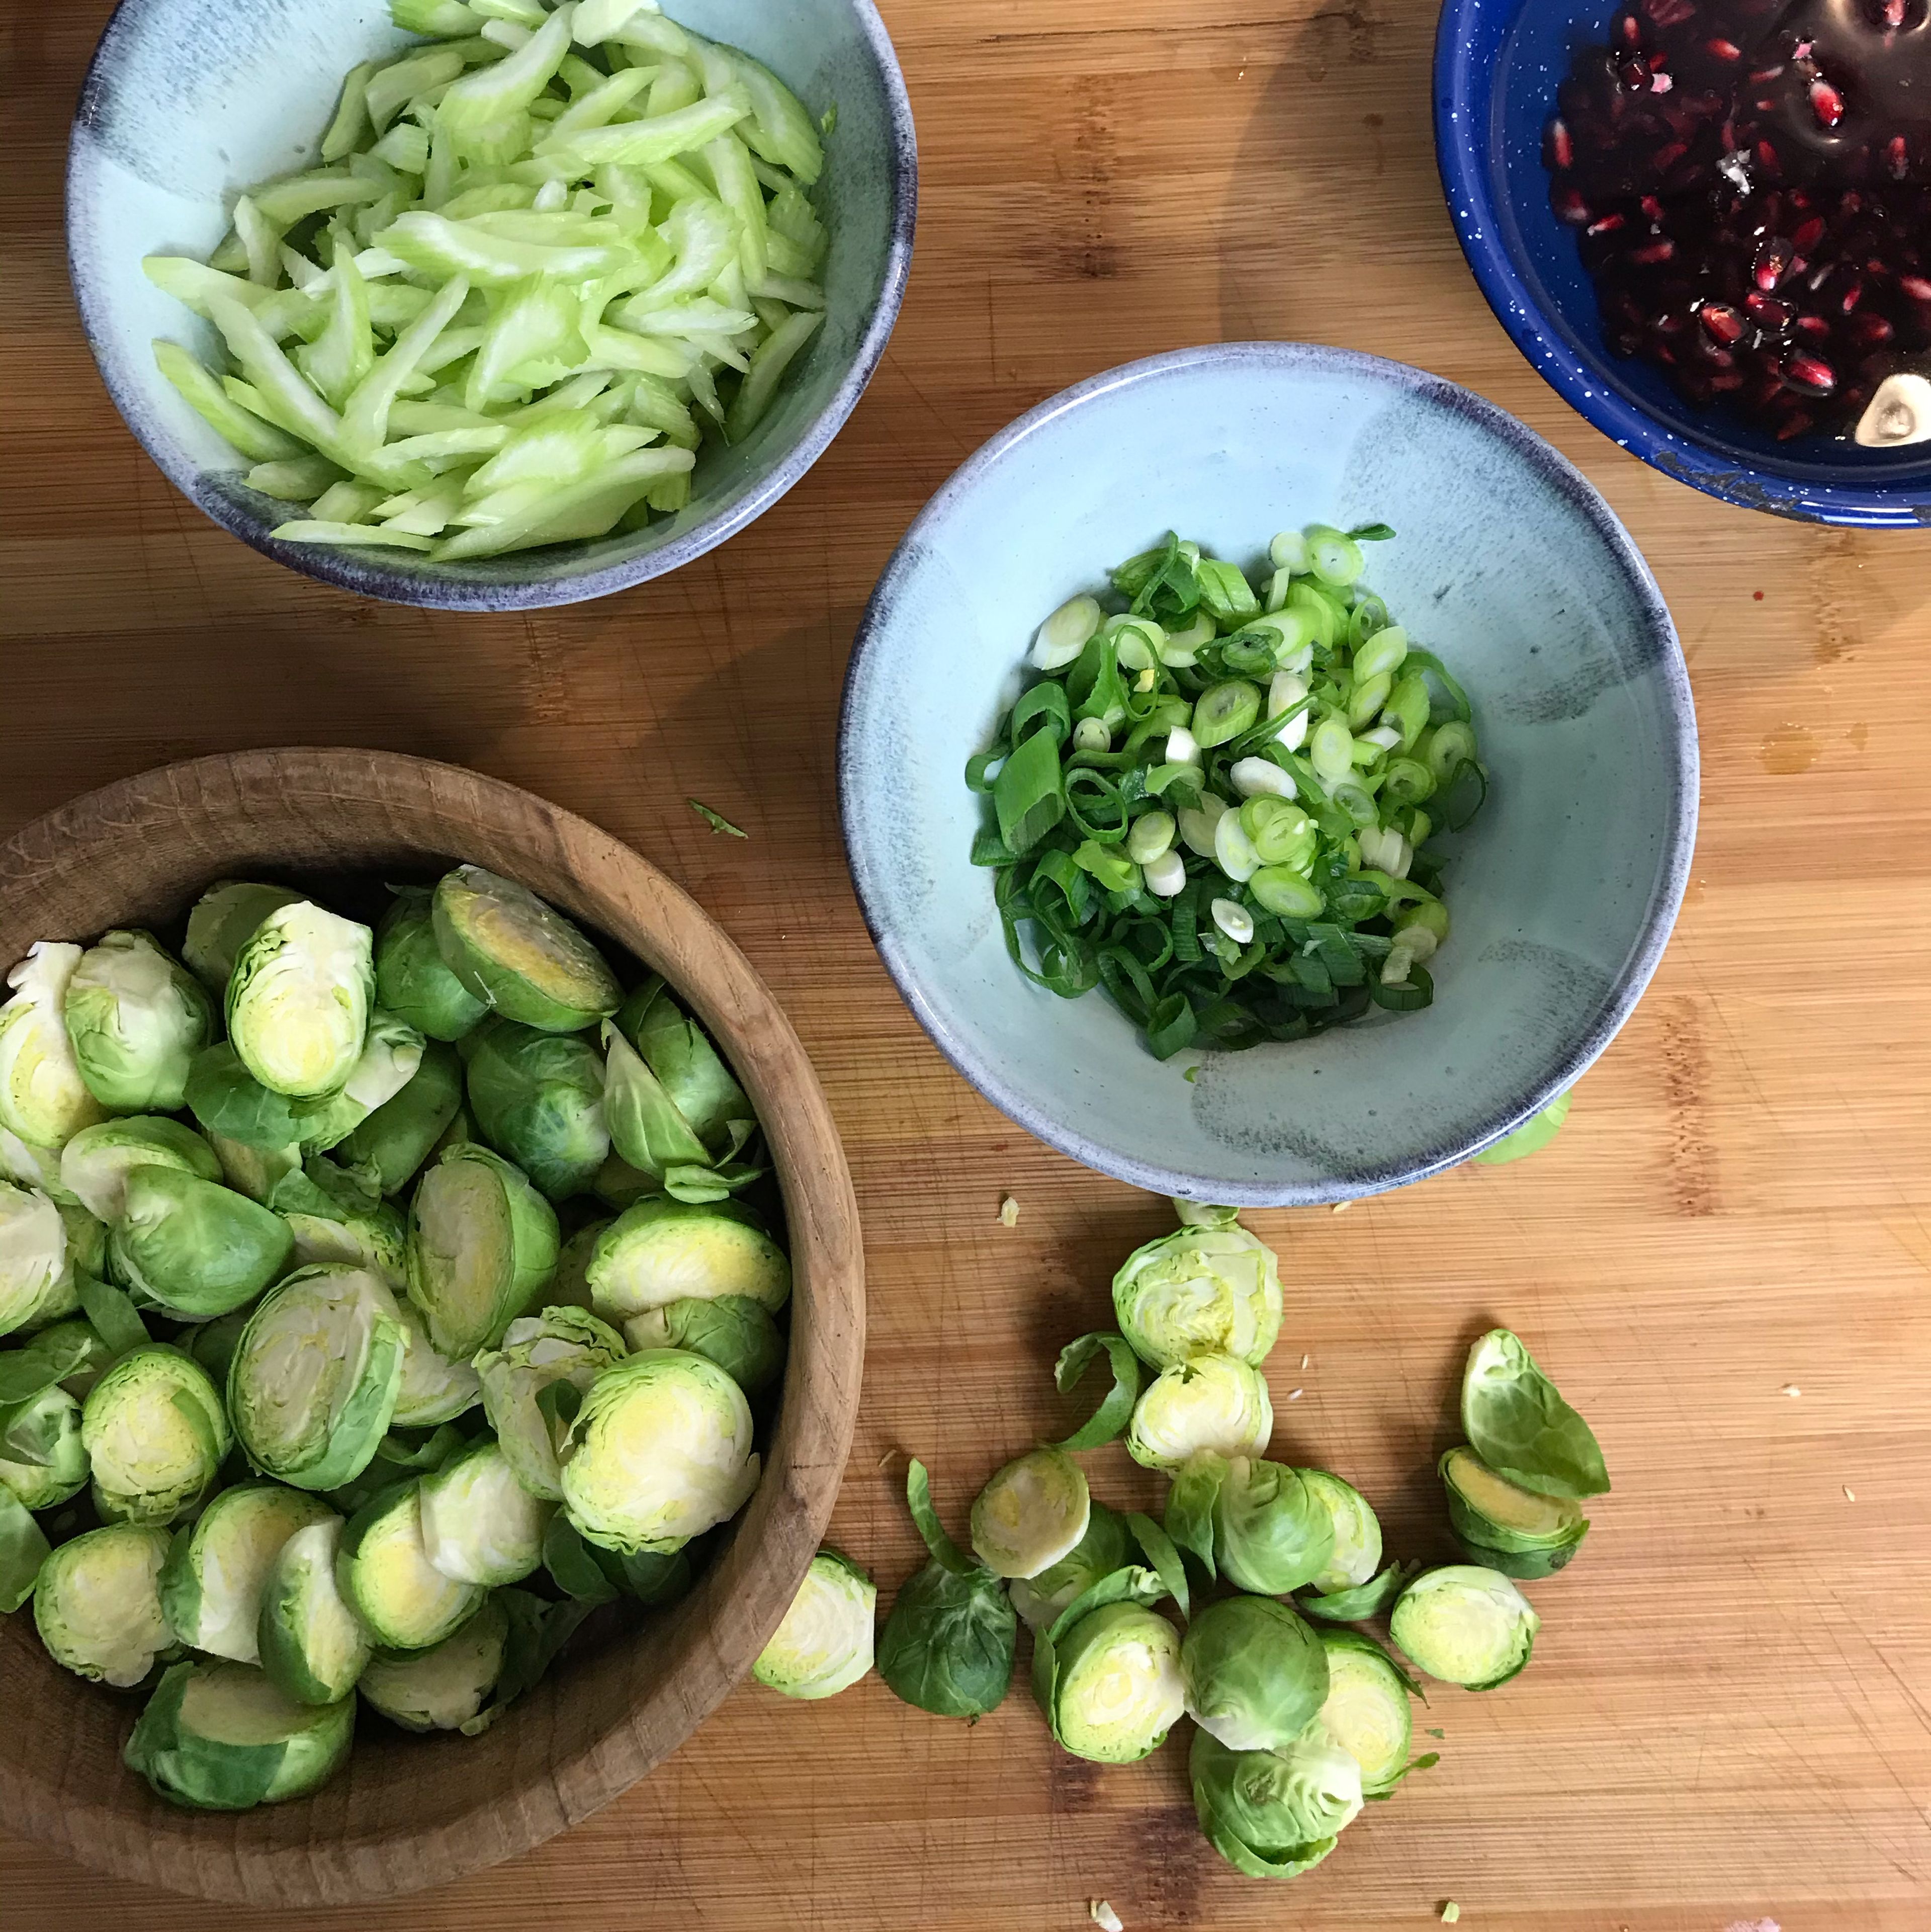 Remove the outer leaves from the Brussels sprouts (if they are brown or dirty) and cut into slices. Pull the strings from the celery and then cut into fine strips. Cut the spring onions into fine rings as well. Remove the pomegranate seeds. Wash the frisée, spin it and roughly tear it.